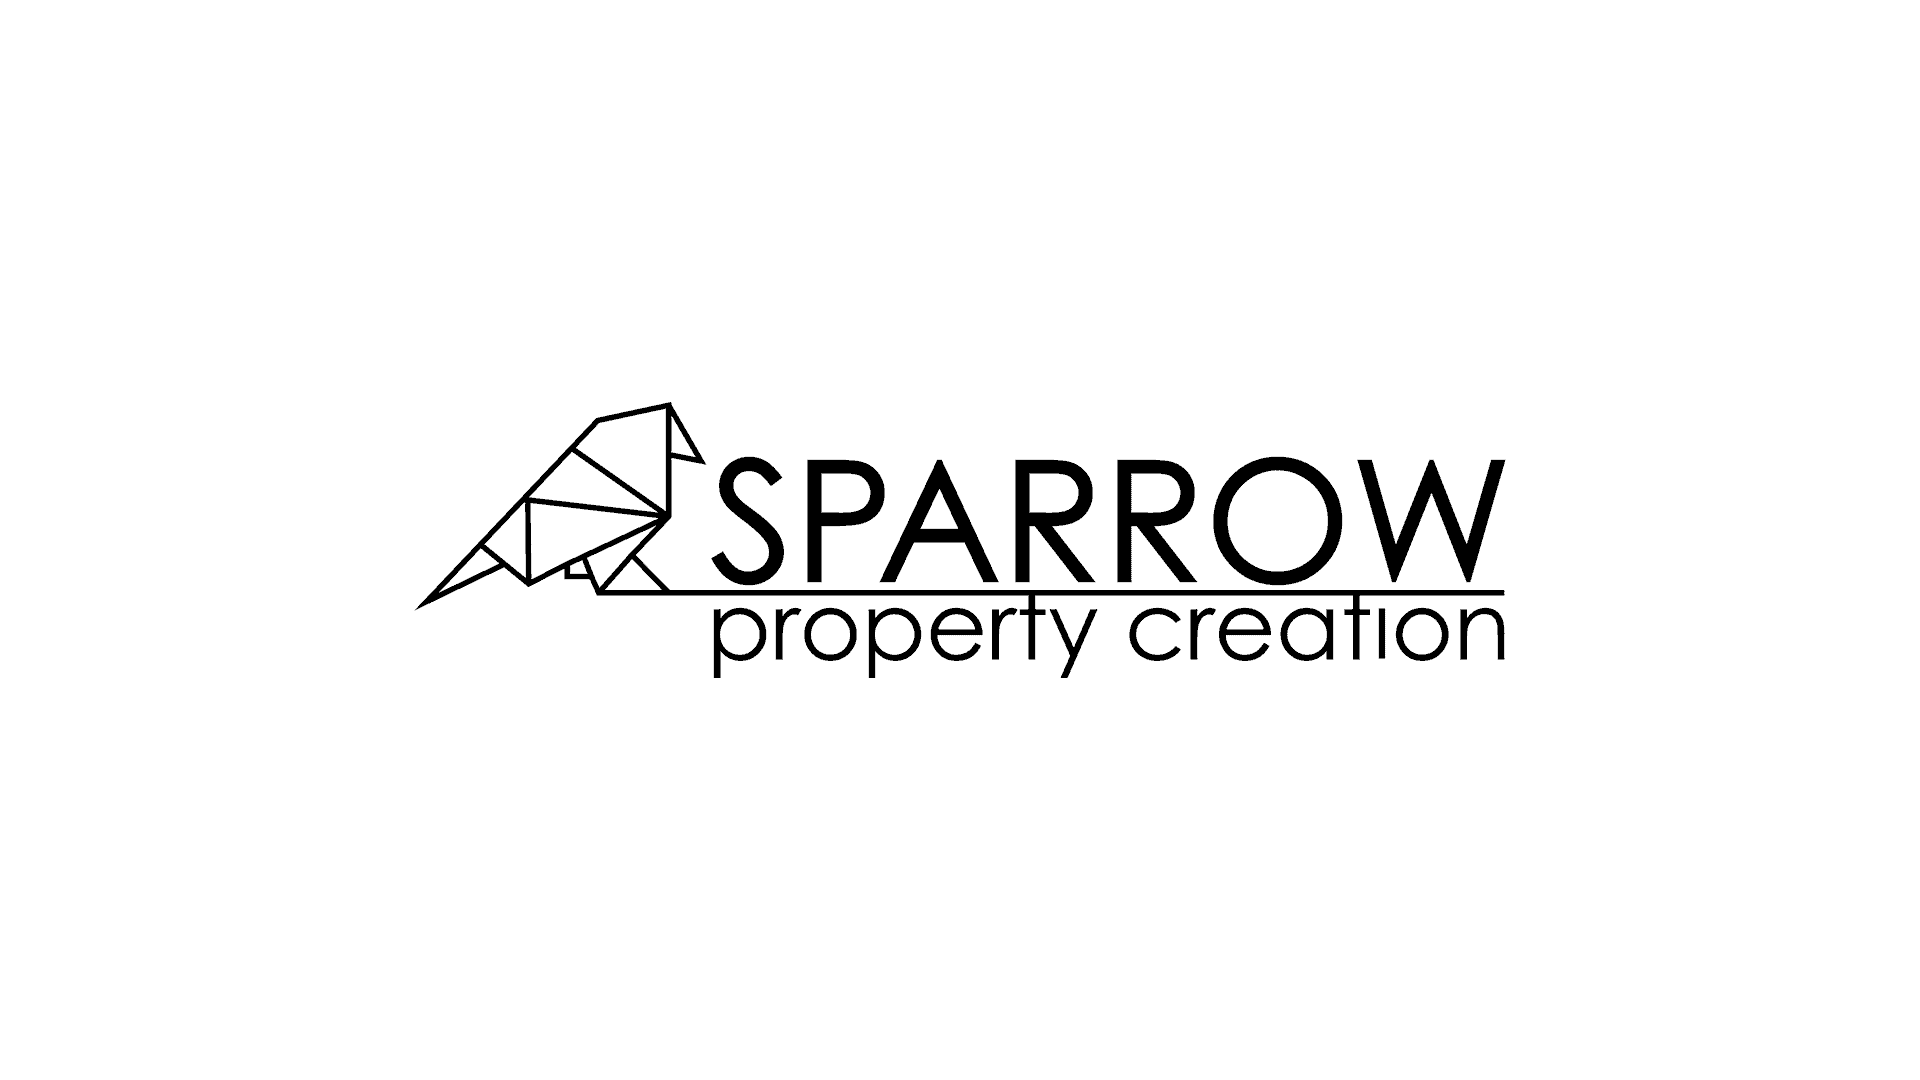 Sparrow Property Creation recommends Buy and Live